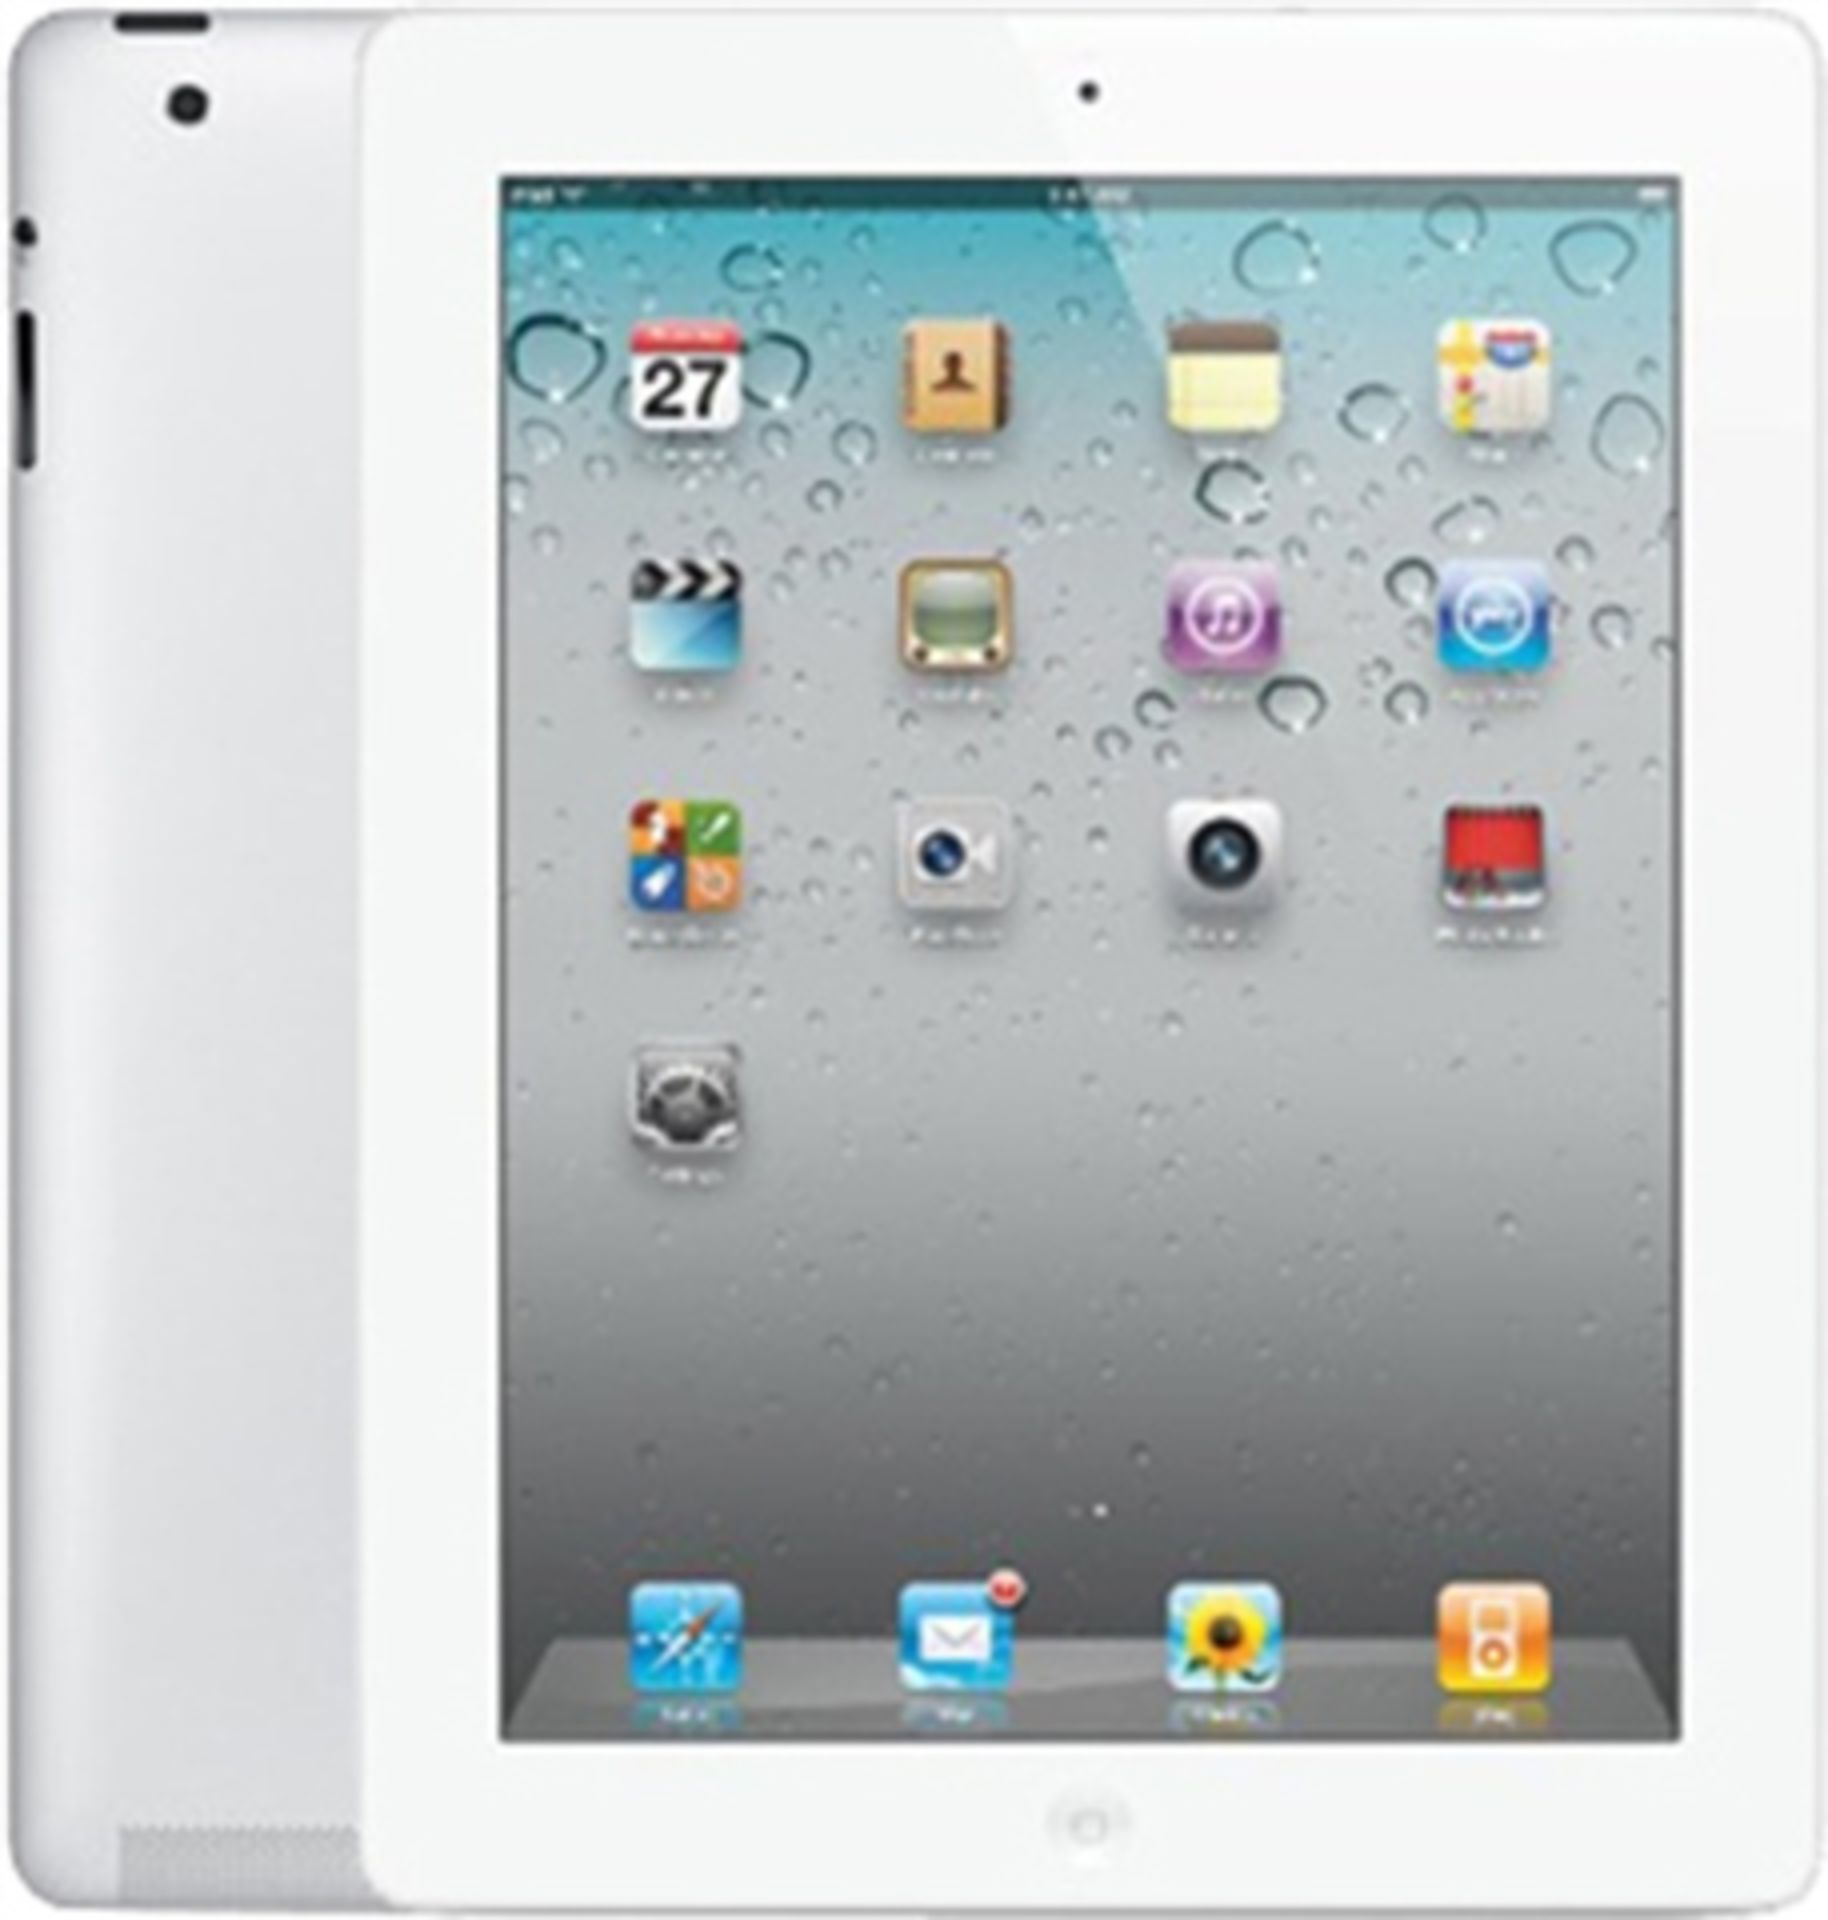 V Grade A Apple iPad 2 16GB Wi-Fi + 3G White with Box and Accessories